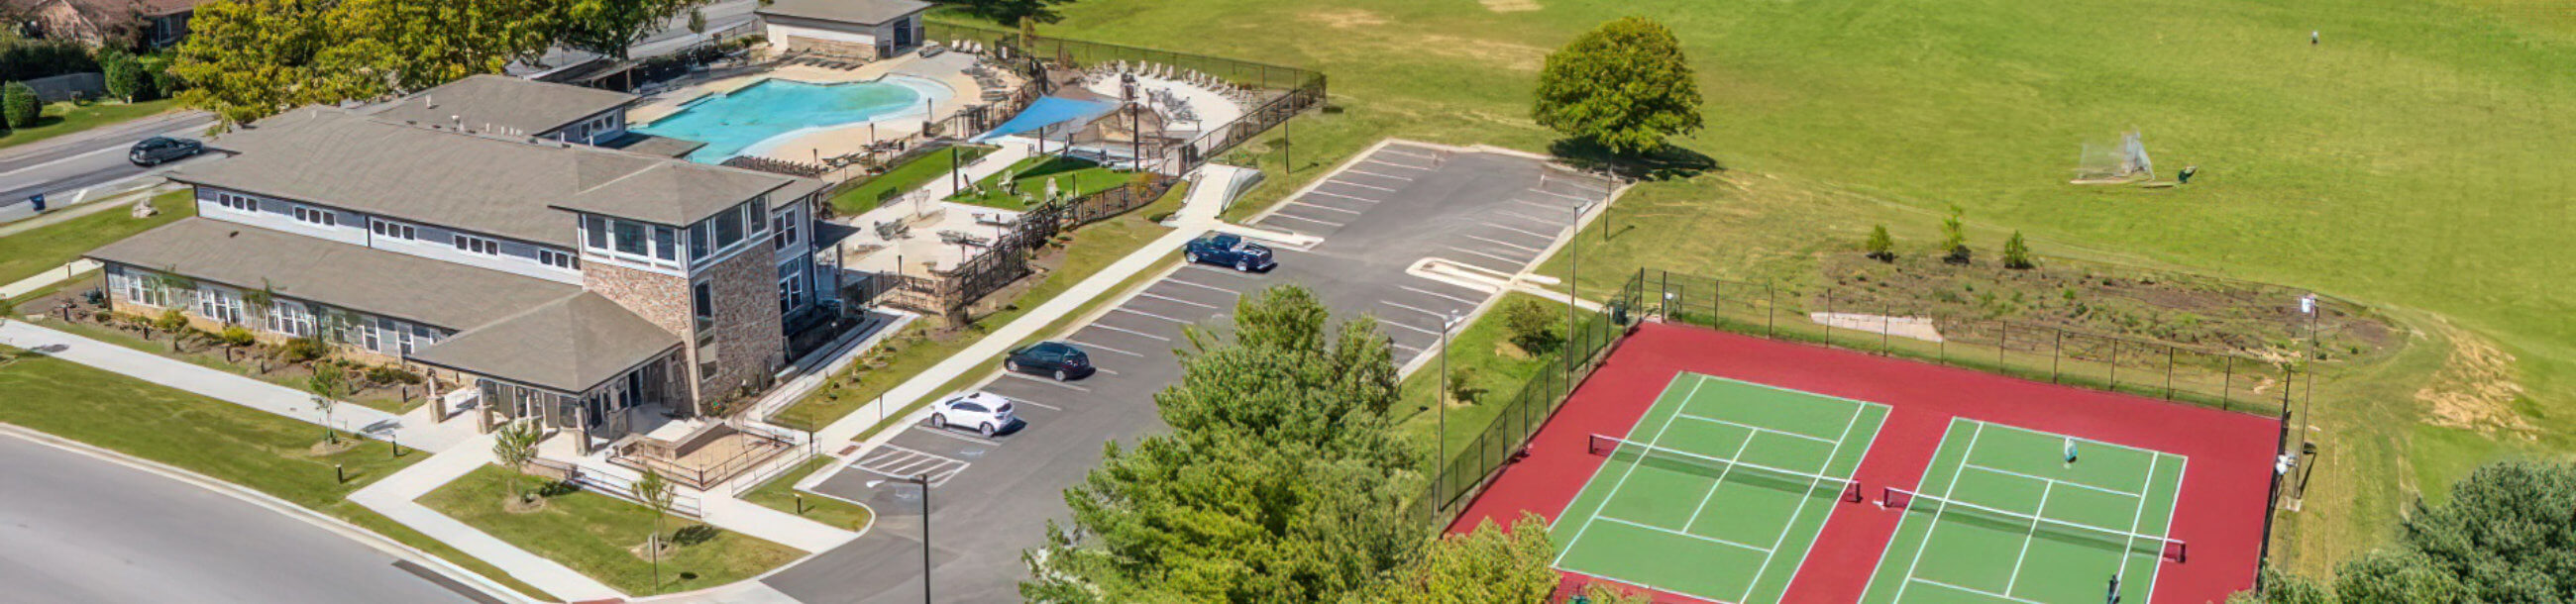 aerial view of the quad featuring tennis court and clubhouse